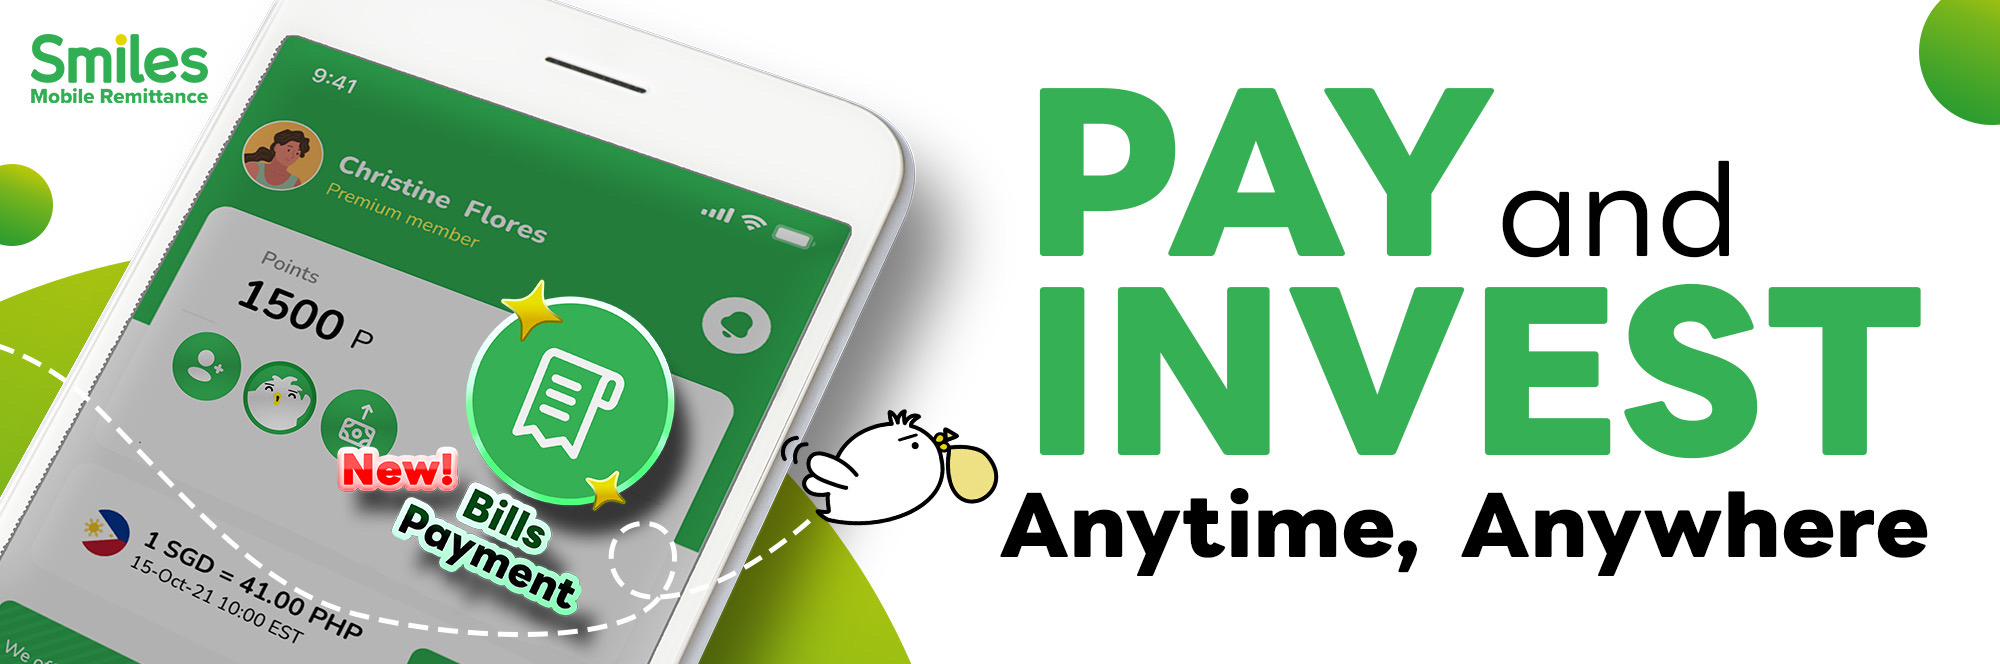 Bills Payment Smiles Singapore New Tech Mobile Remittance Feature